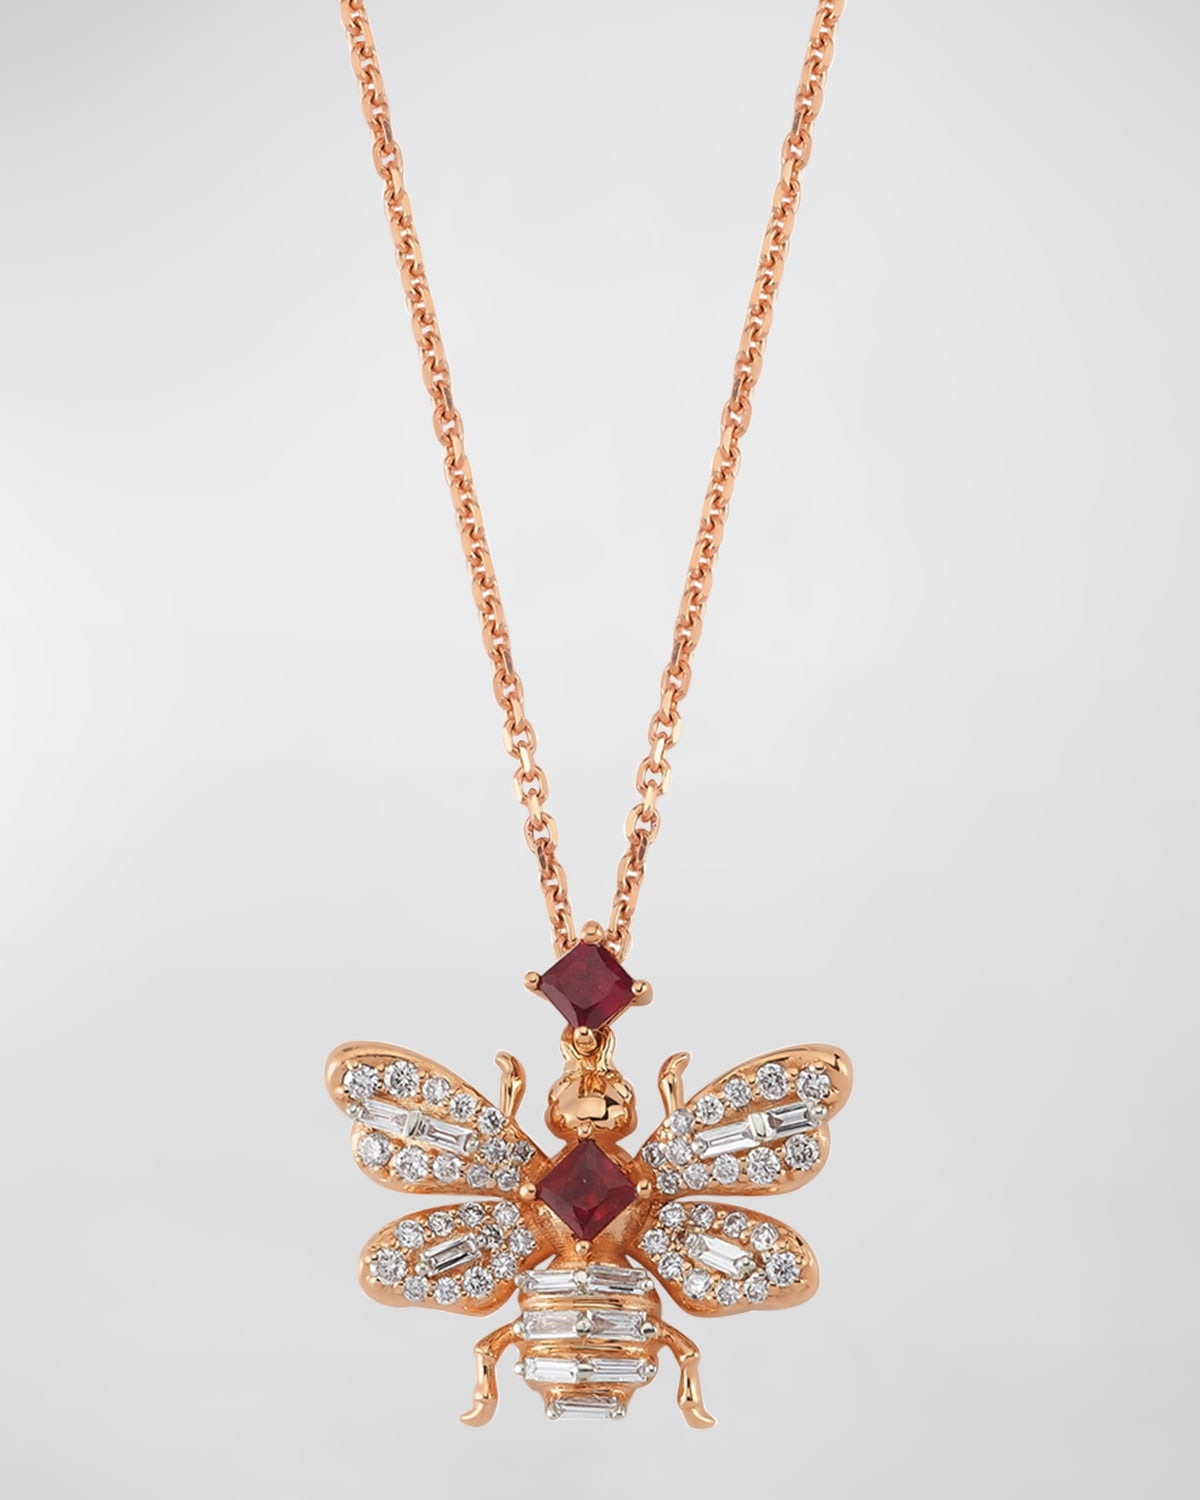 Beegoddess 14k Diamond And Ruby Bee Necklace